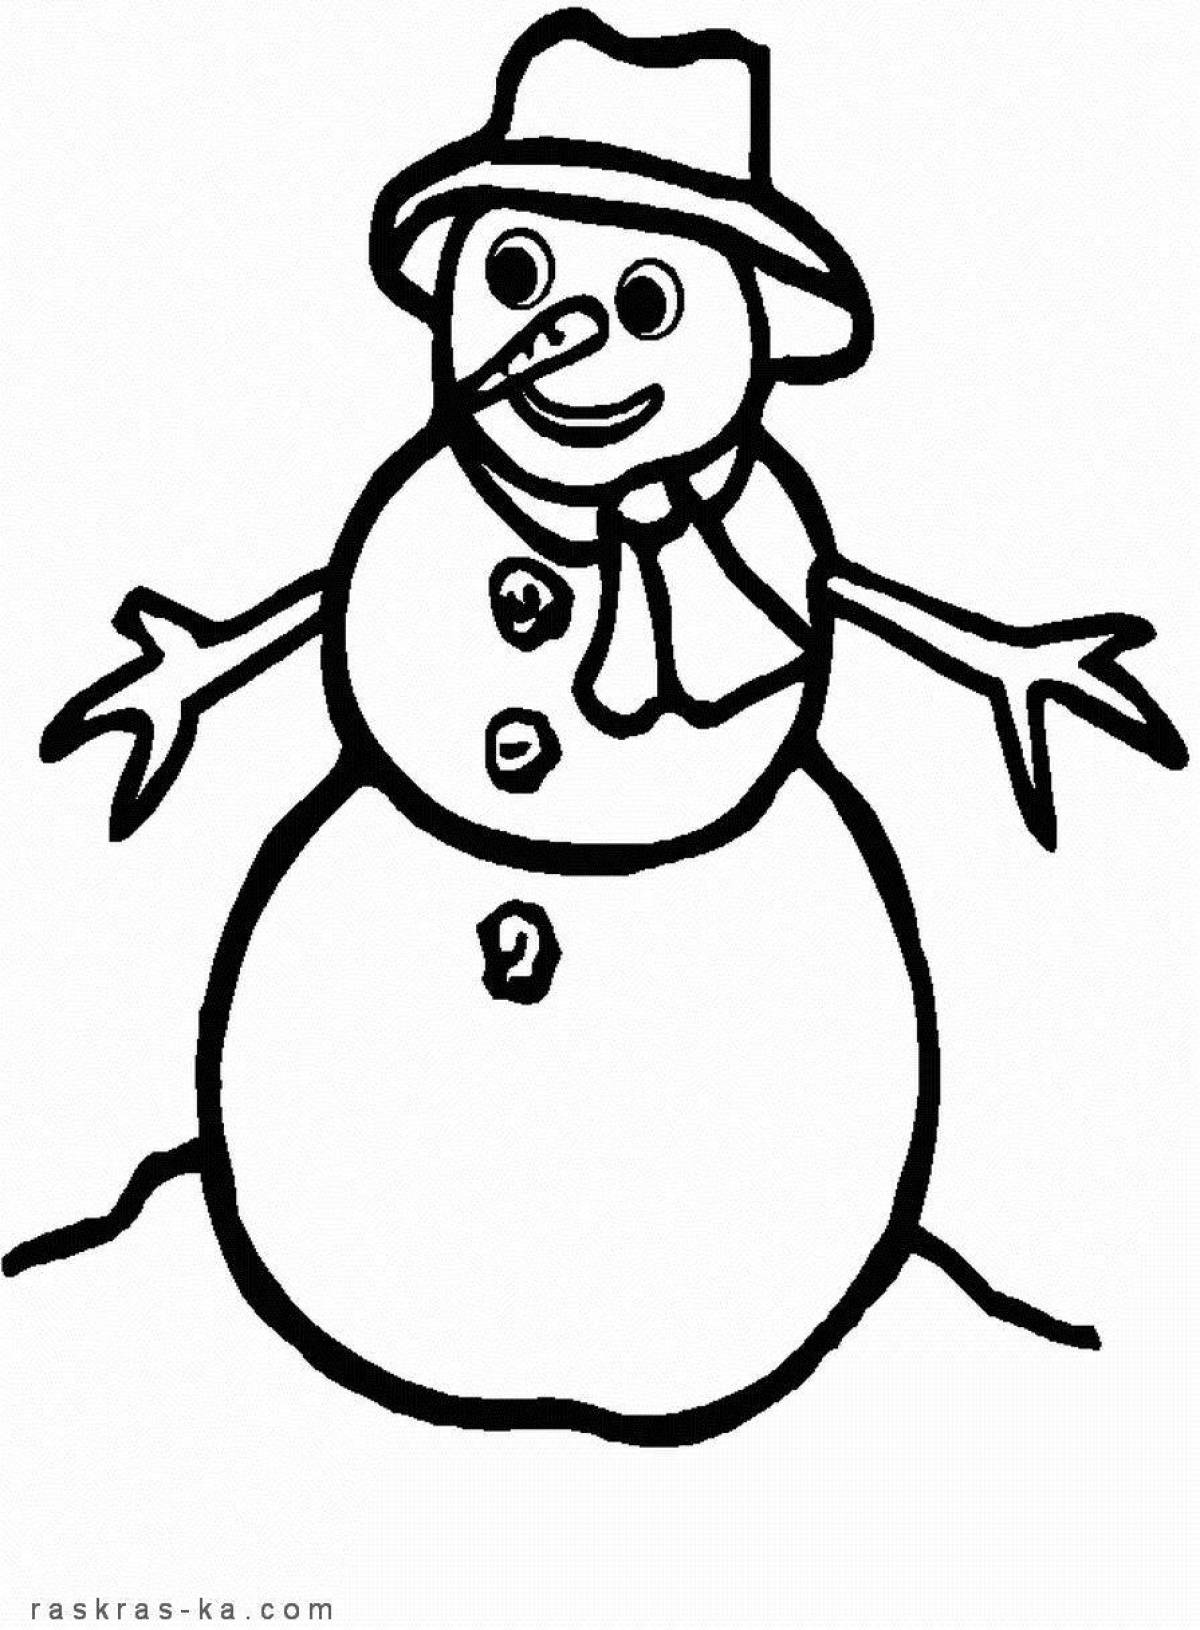 Luminous snowman coloring book for children 4-5 years old